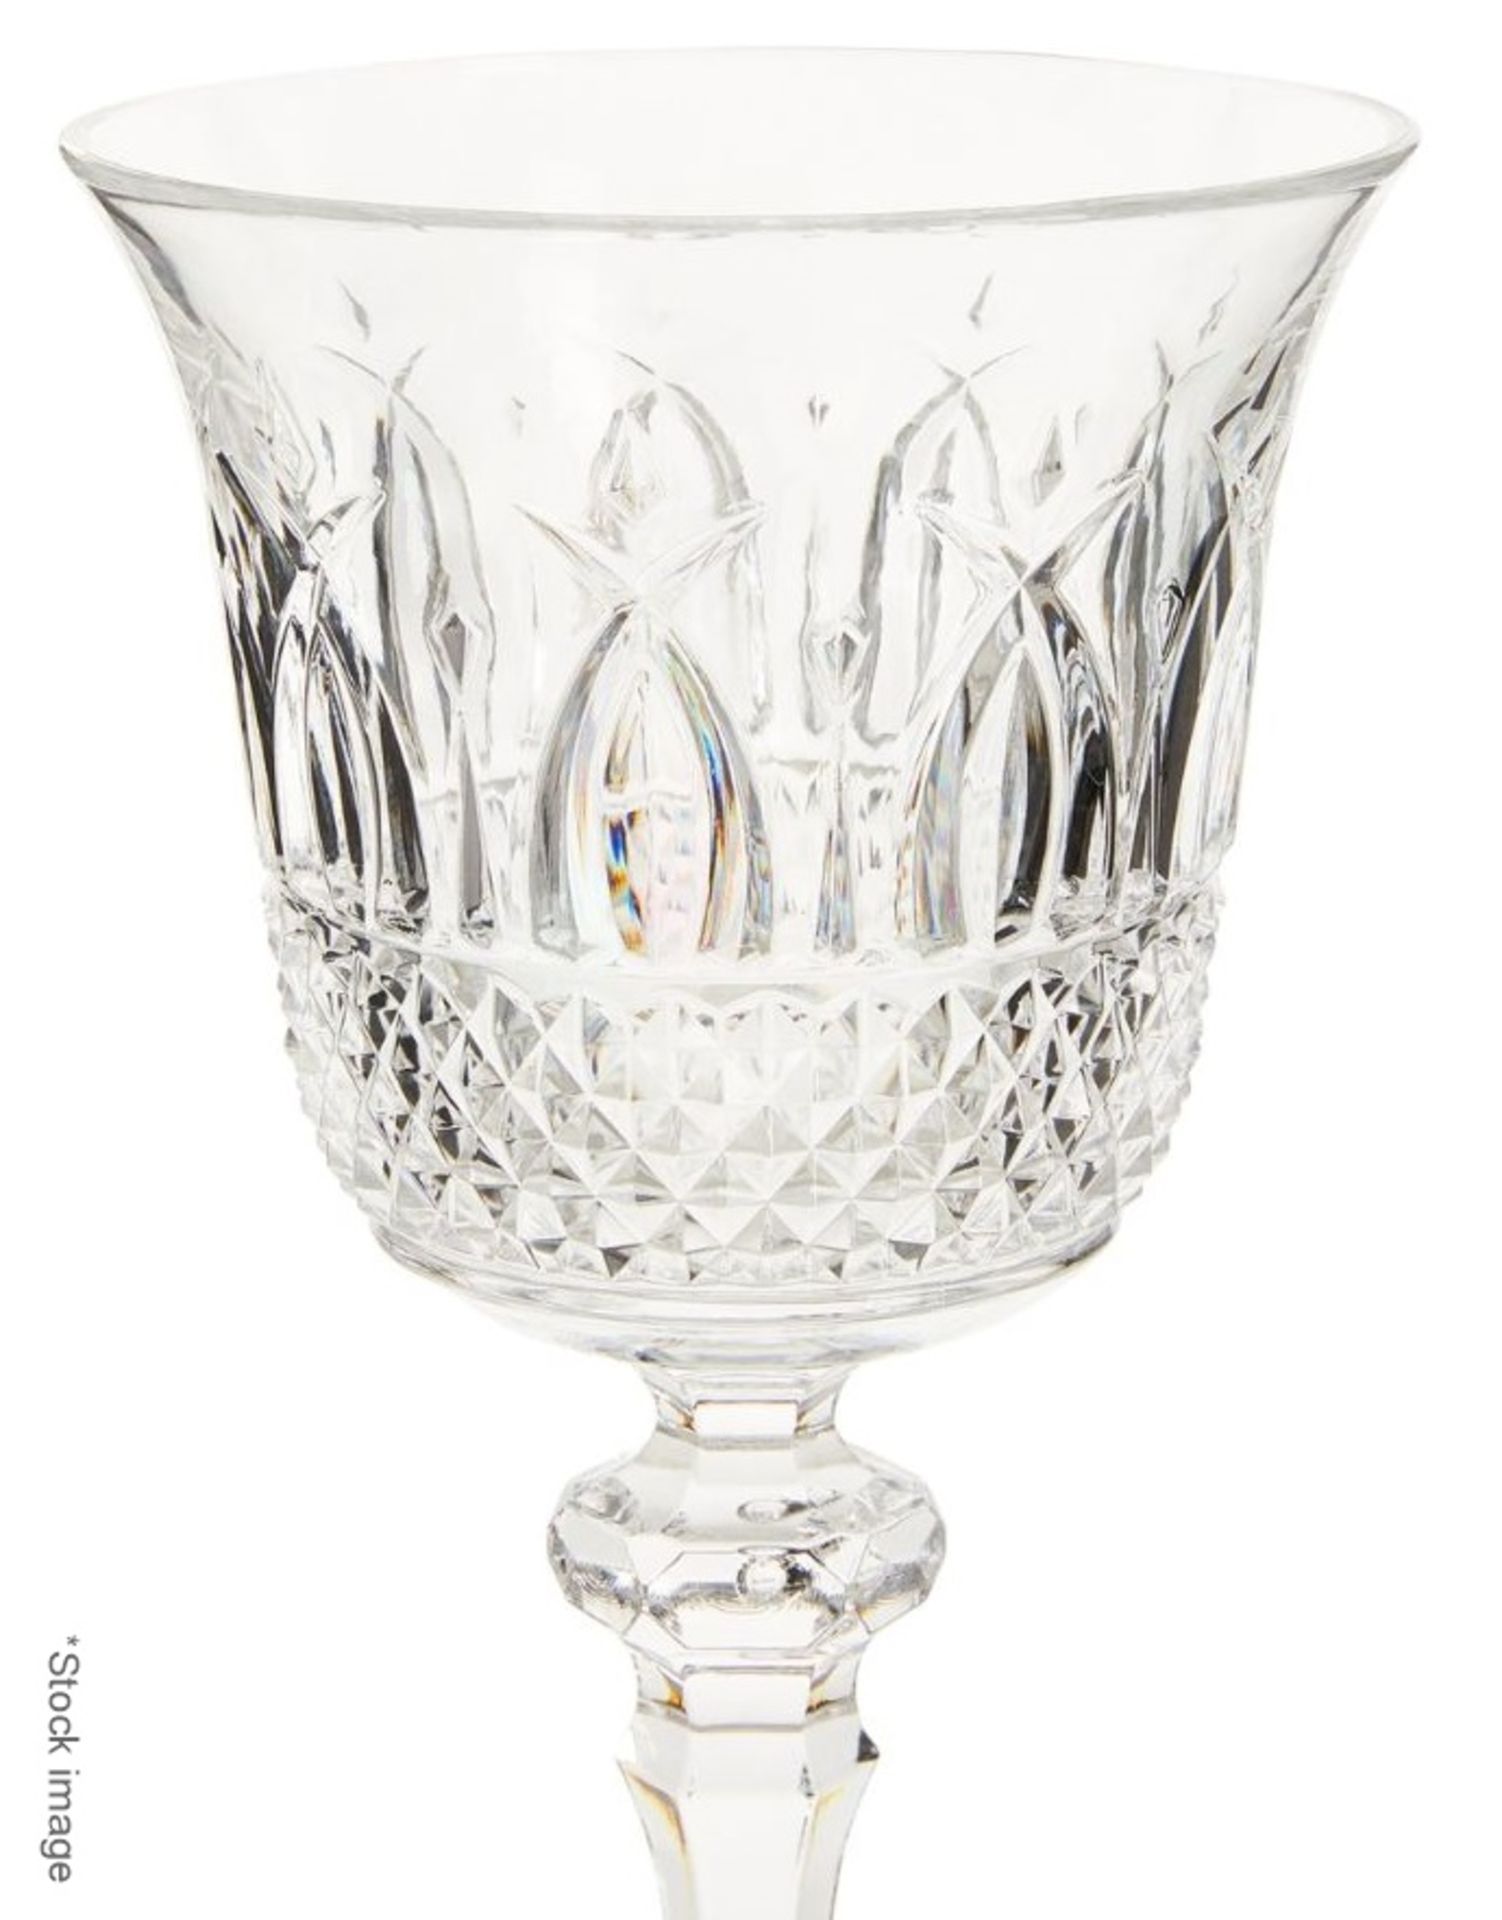 Set of 6 x MARIO LUCA GIUSTI 'Italia' Synthetic Clear Crystal Wine Glasses (180ml) - RRP £144.00 - Image 3 of 8